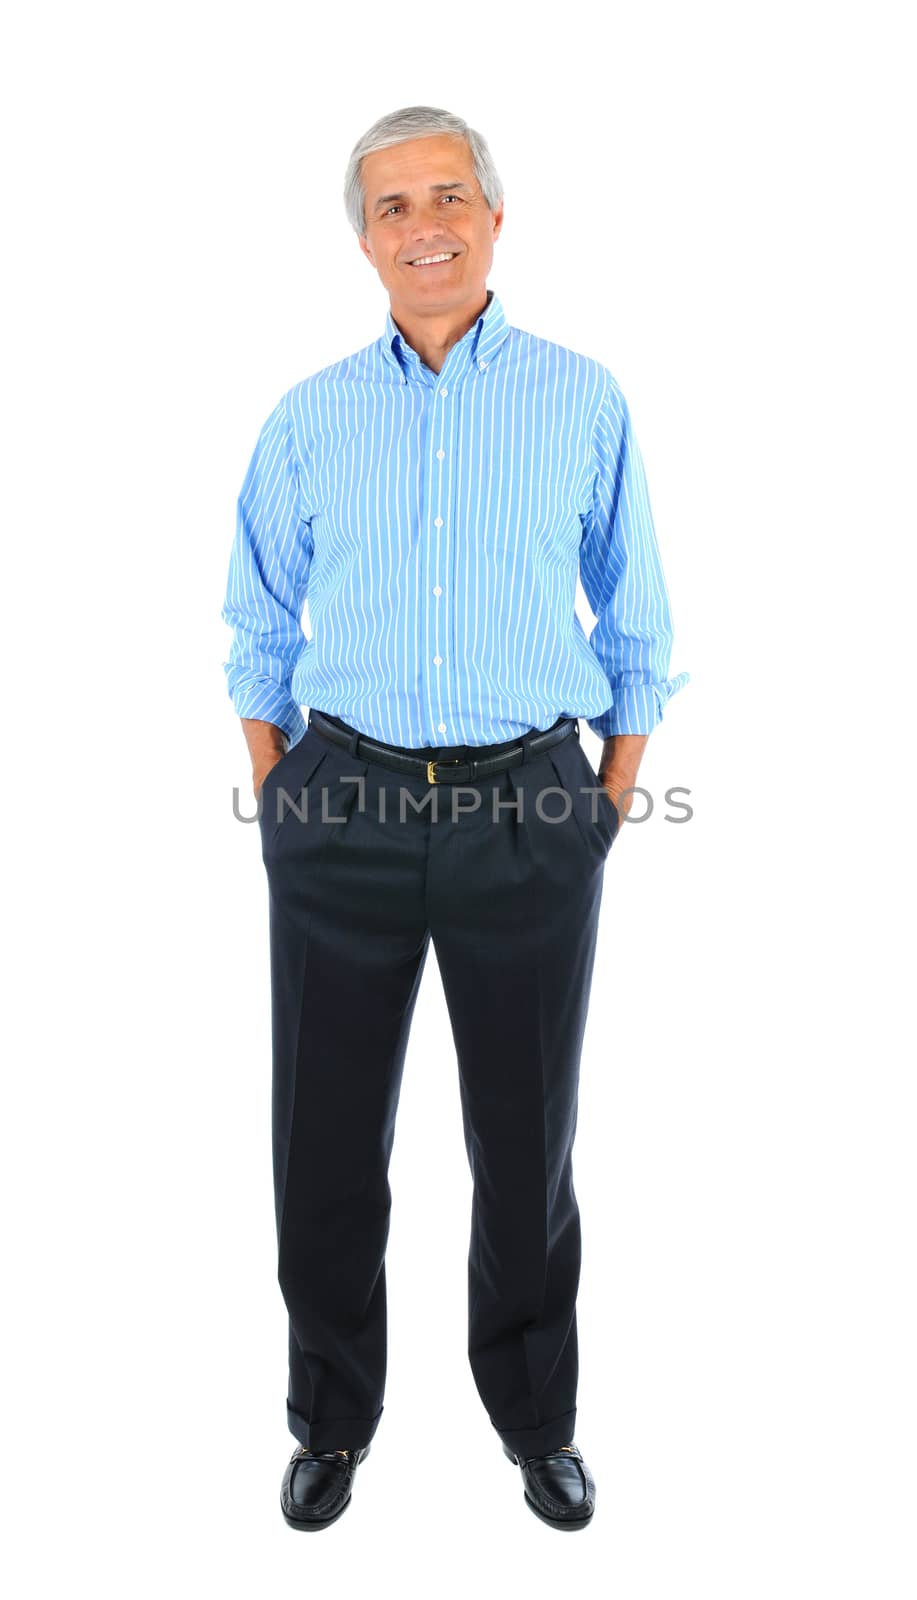 Smiling middle aged businessman standing with his hands in pockets. Full length over a white background.